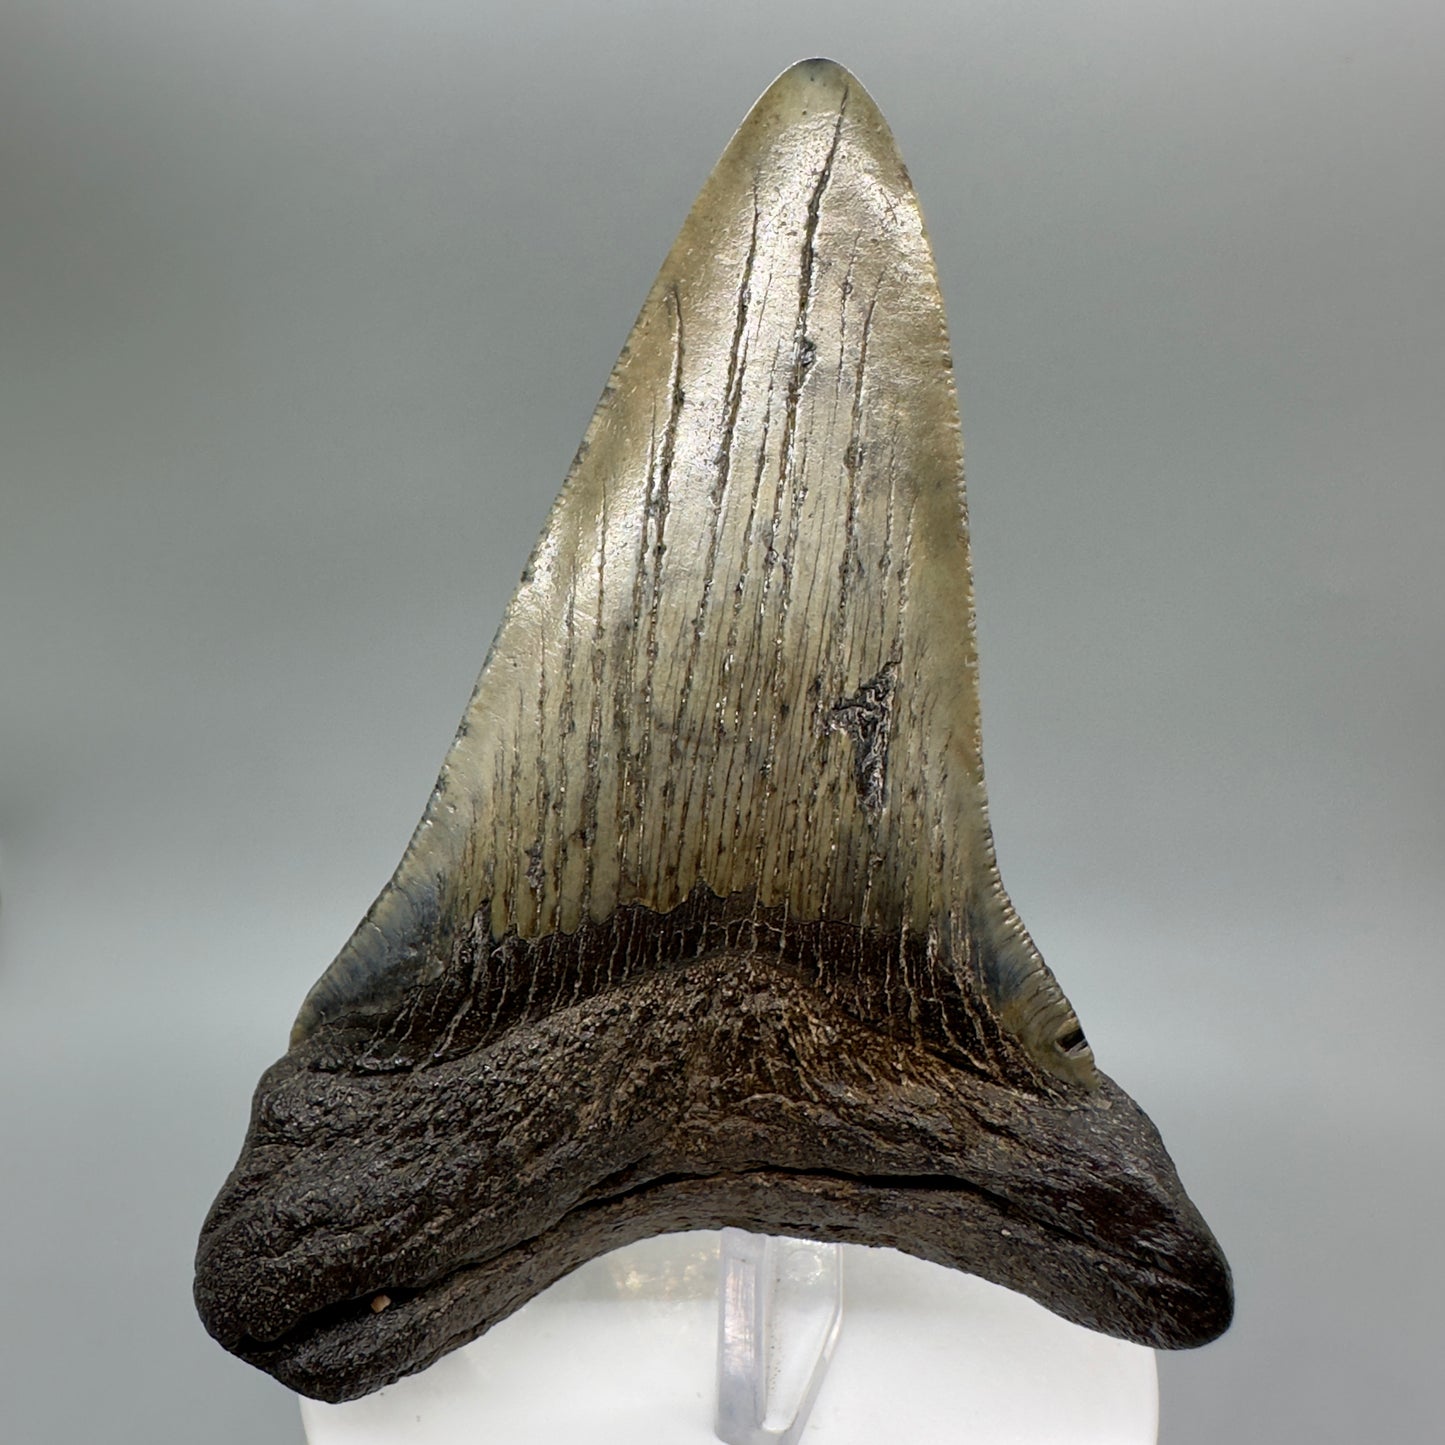 Deformed 4.03" Fossil Megalodon Tooth: Scuba Diving Discovery from Southeast USA CM4652 - Back